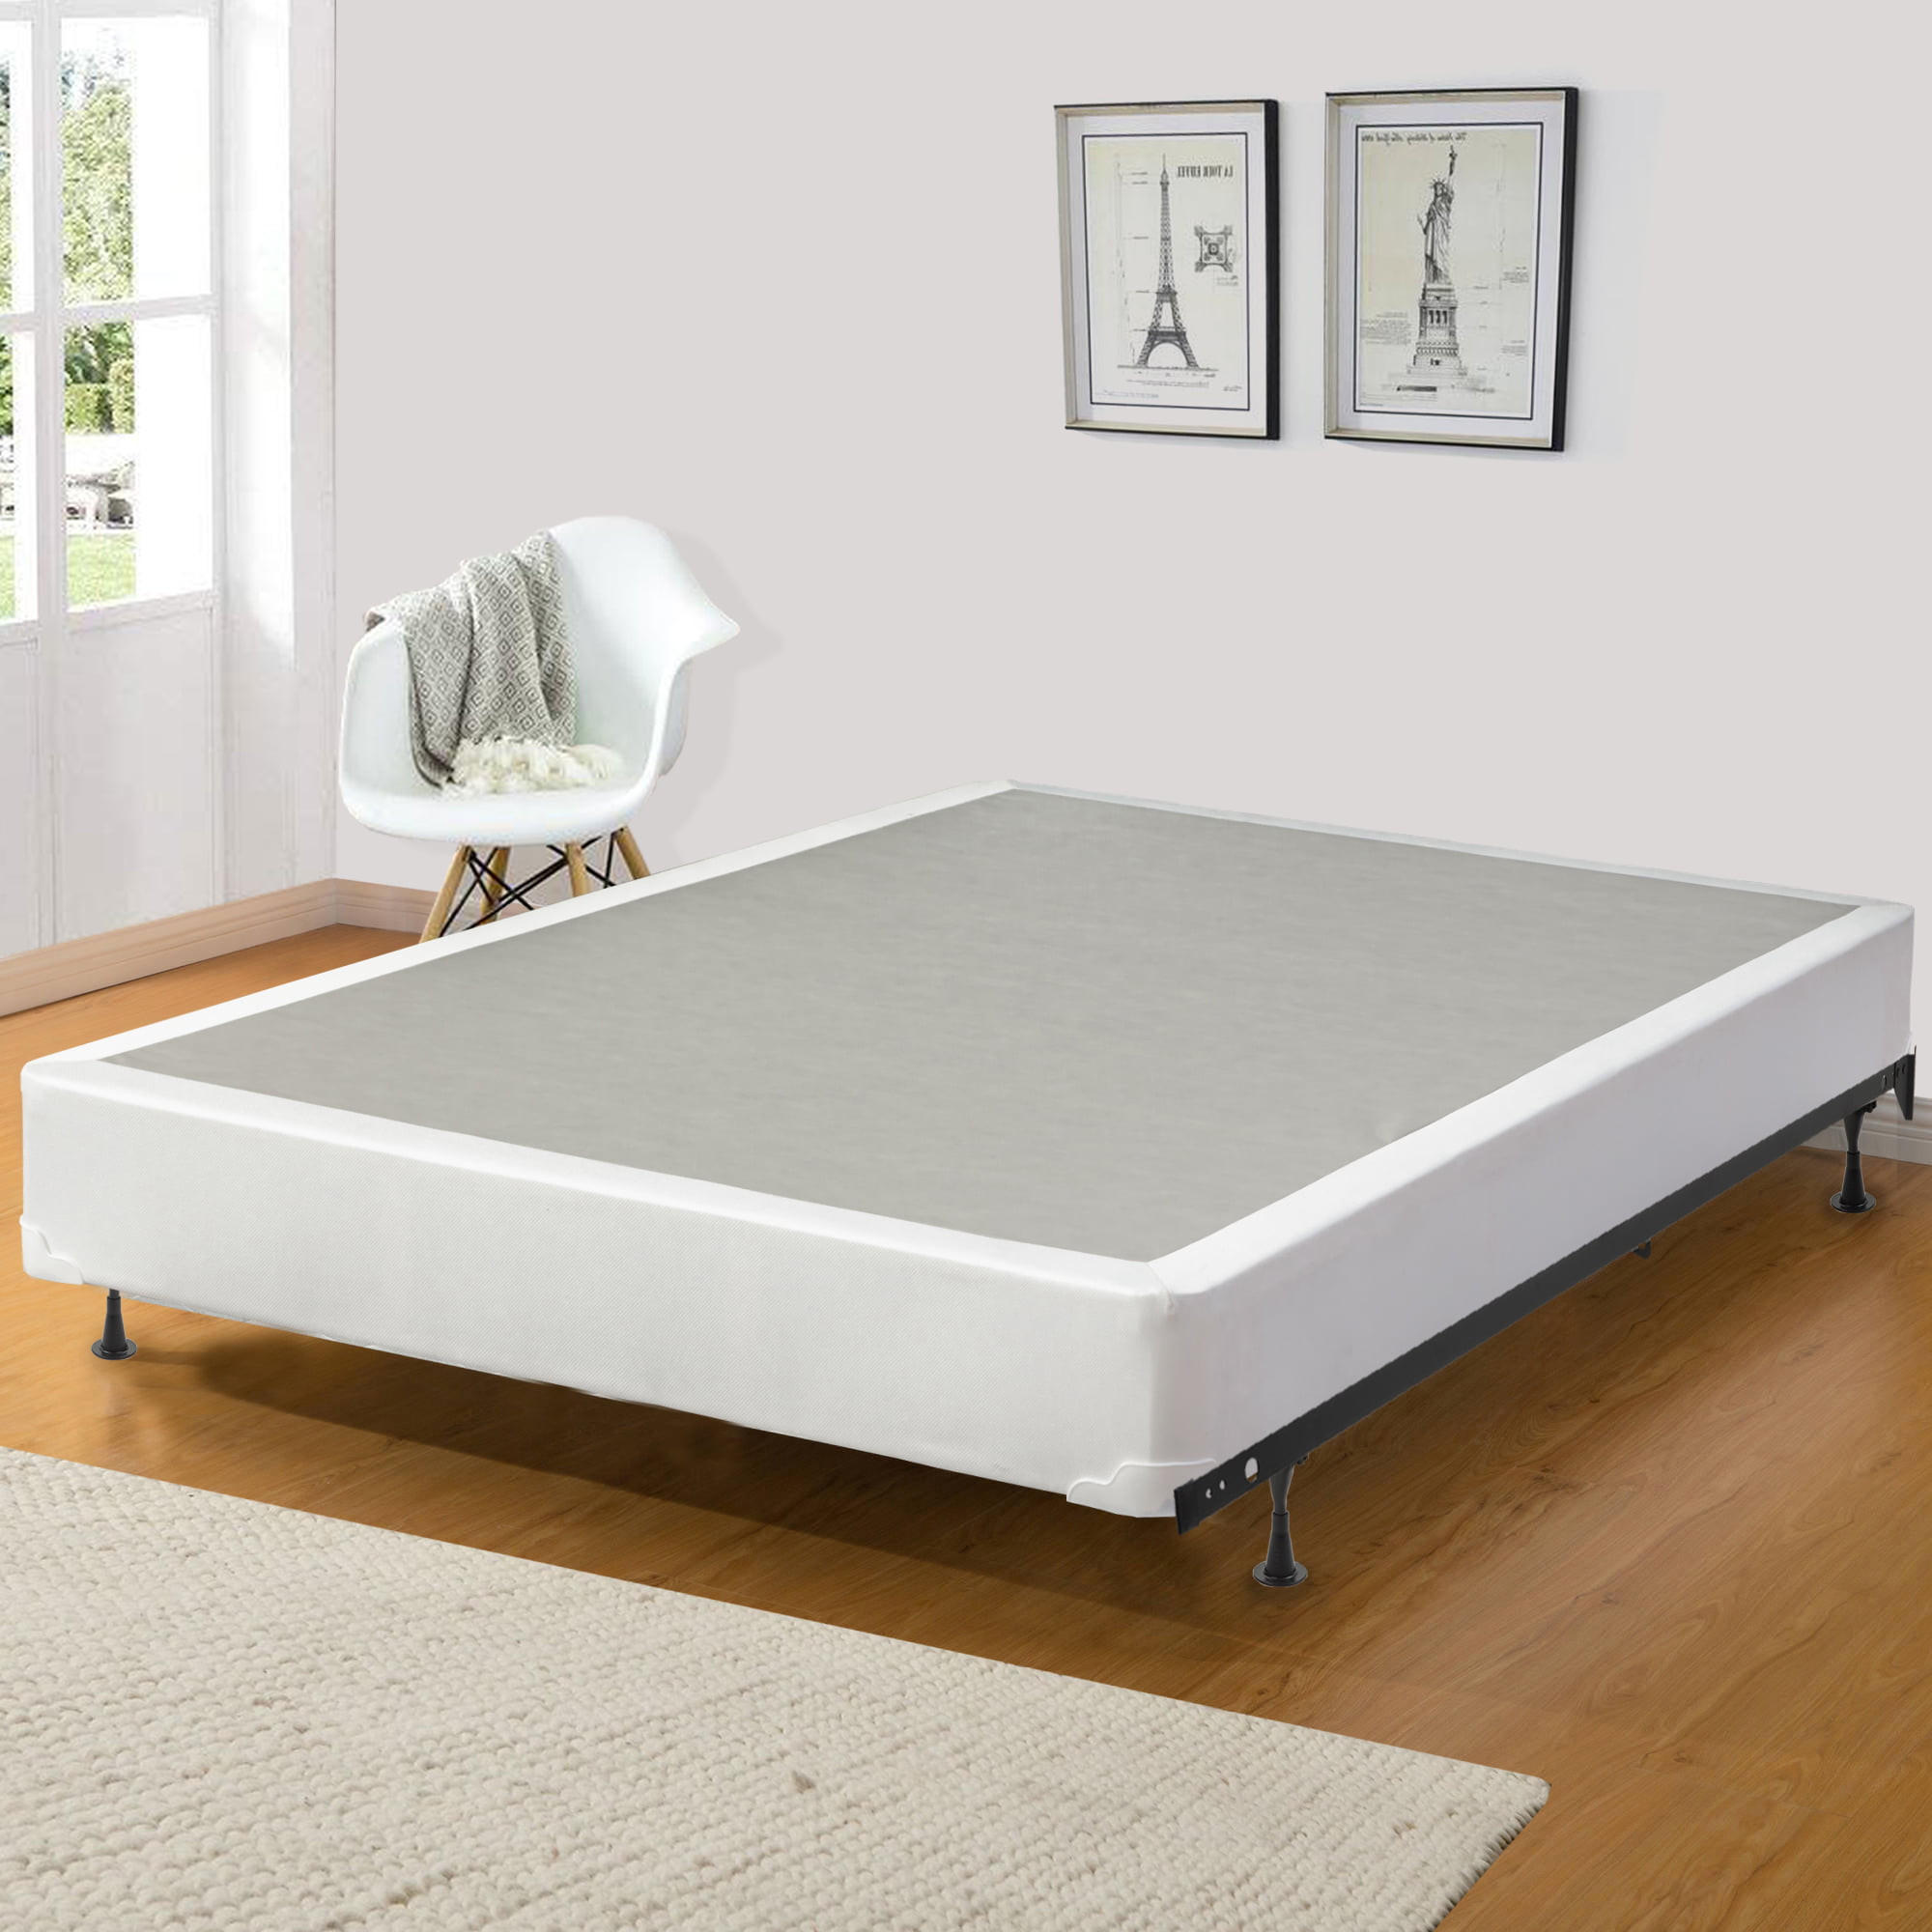 7.5" Full Size Box Spring Metal Bed Mattress Foundation Folding Bedroom Home New 